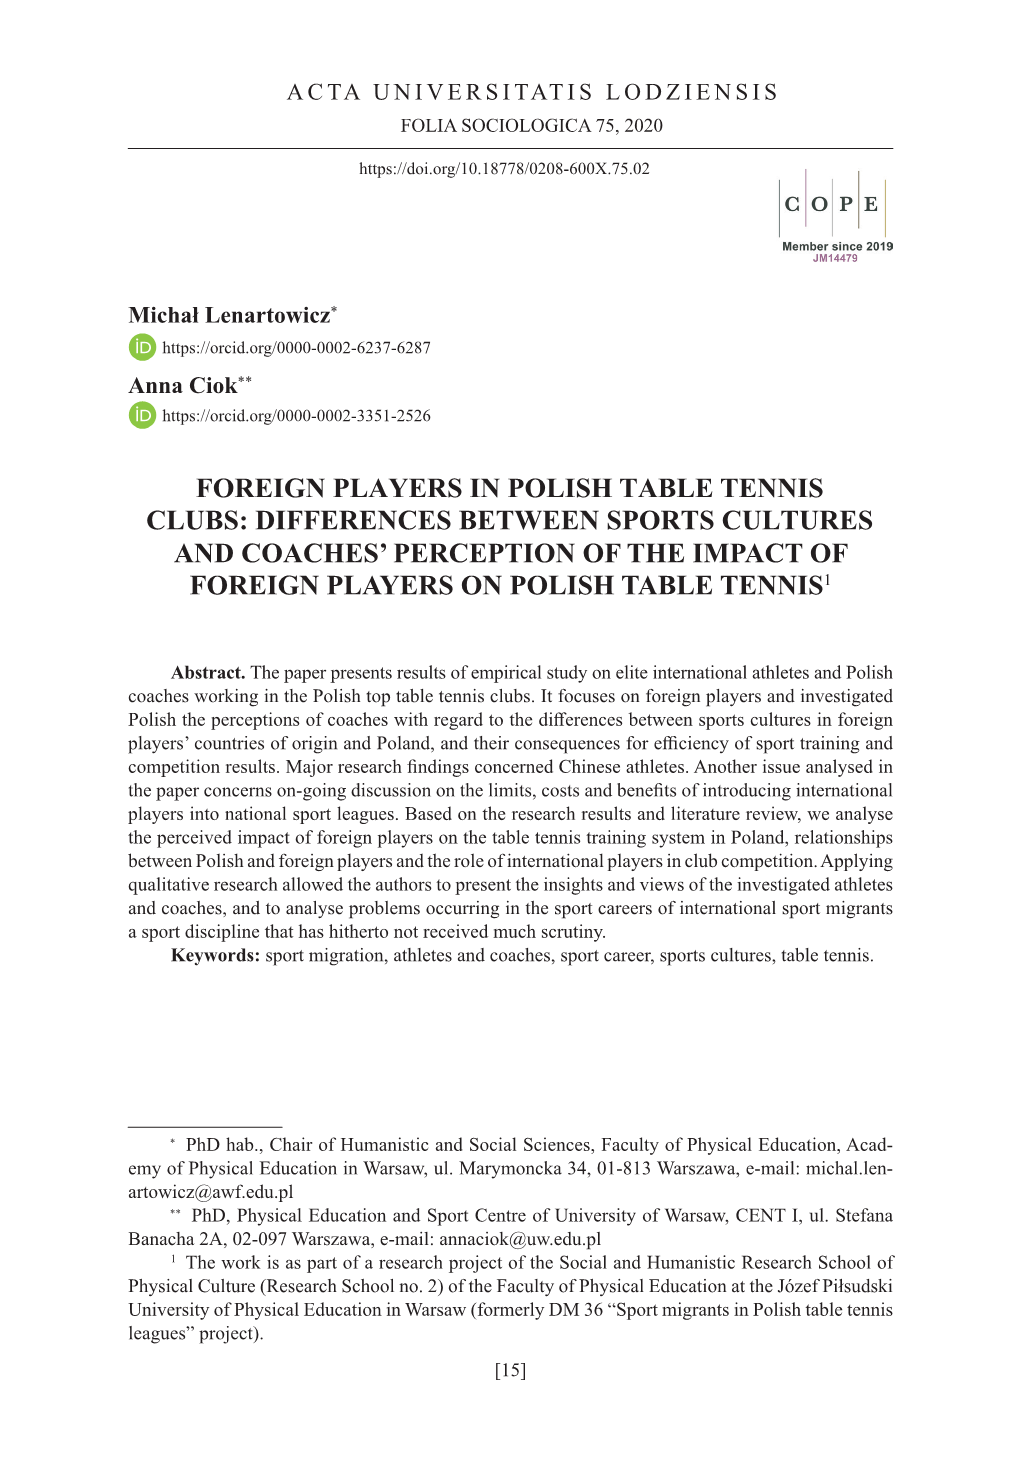 Foreign Players in Polish Table Tennis Clubs: Differences Between Sports Cultures and Coaches' Perception of the Impact Of